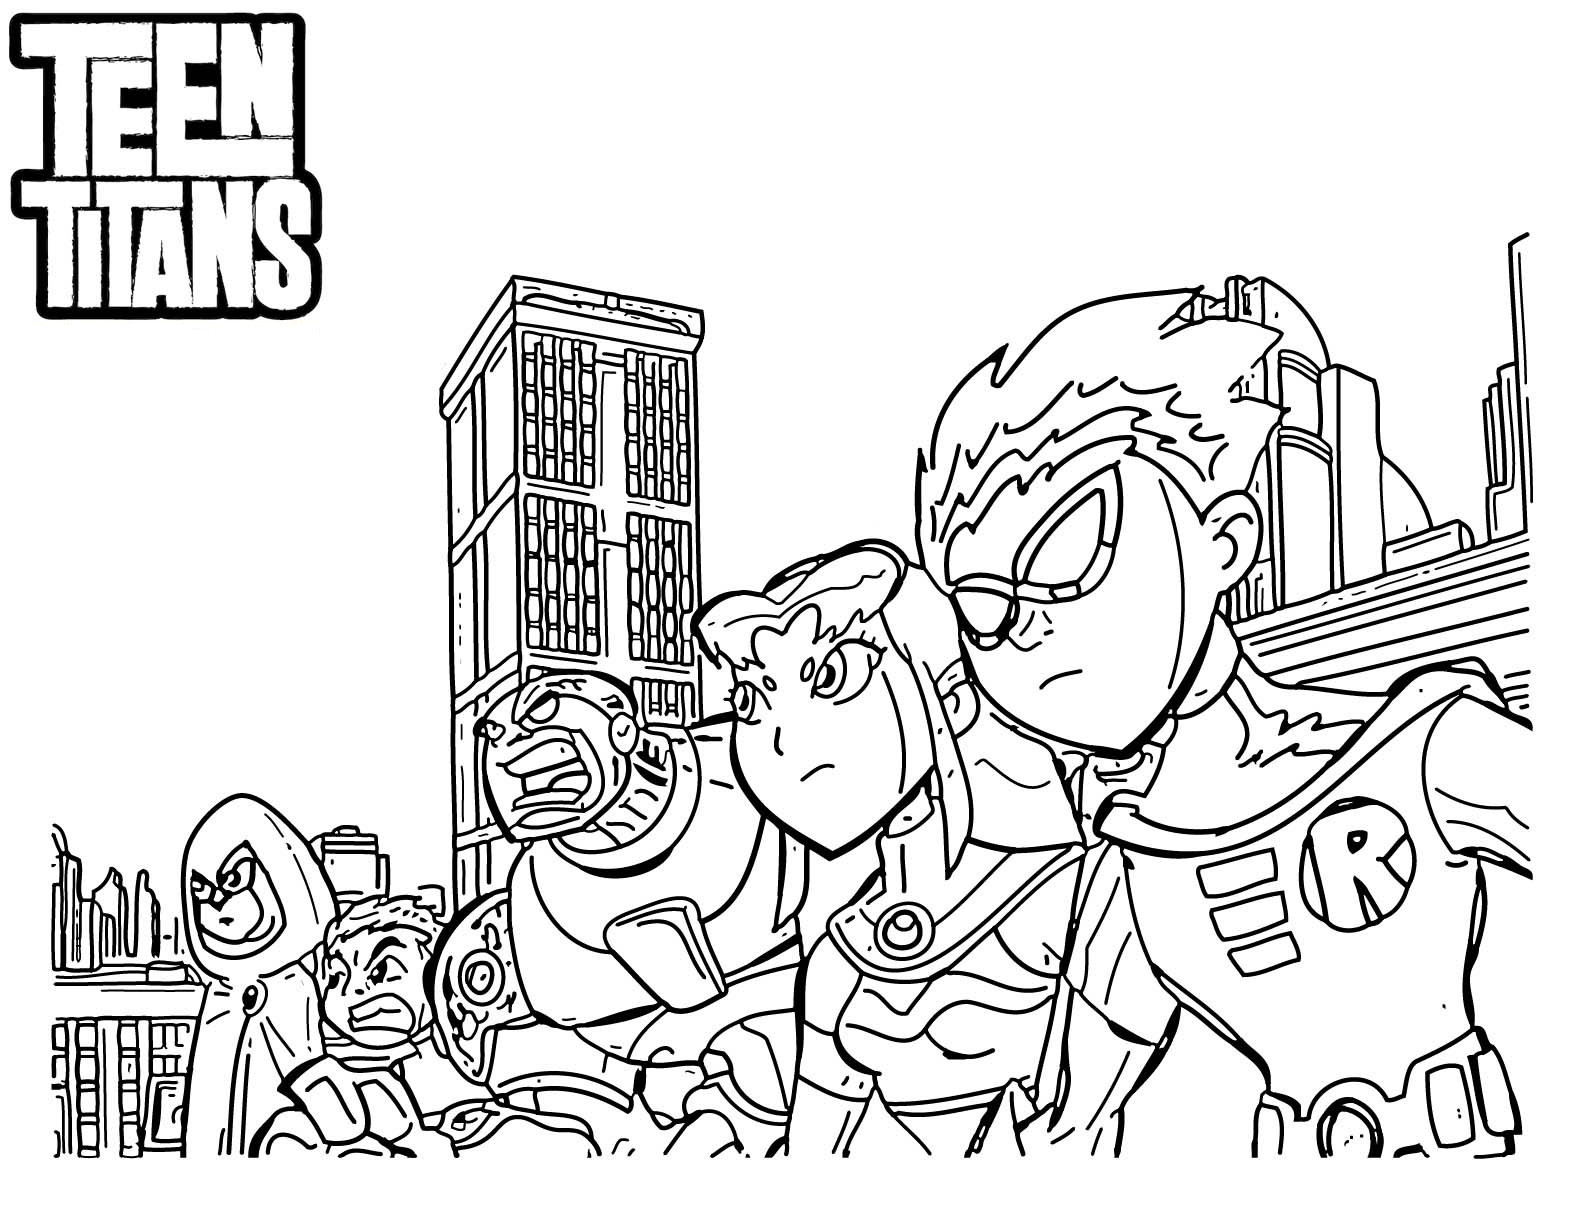 Fun Coloring Pages For Teens Online For Free
 Teen Titans Coloring Pages Best Coloring Pages For Kids